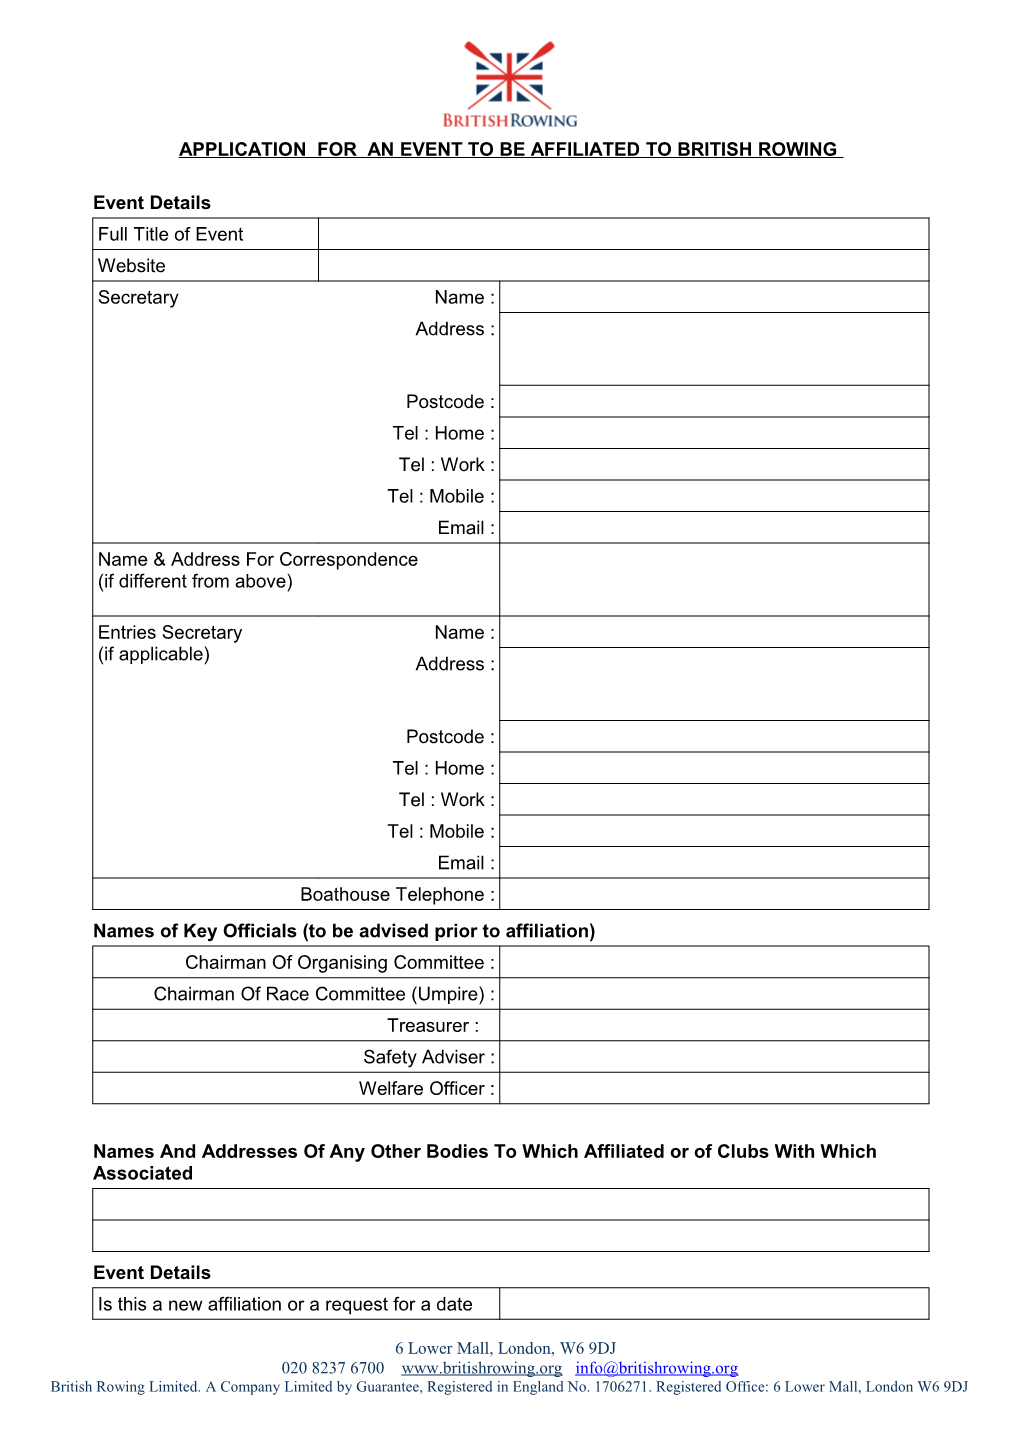 Application for an Event to Be Affiliated to British Rowing